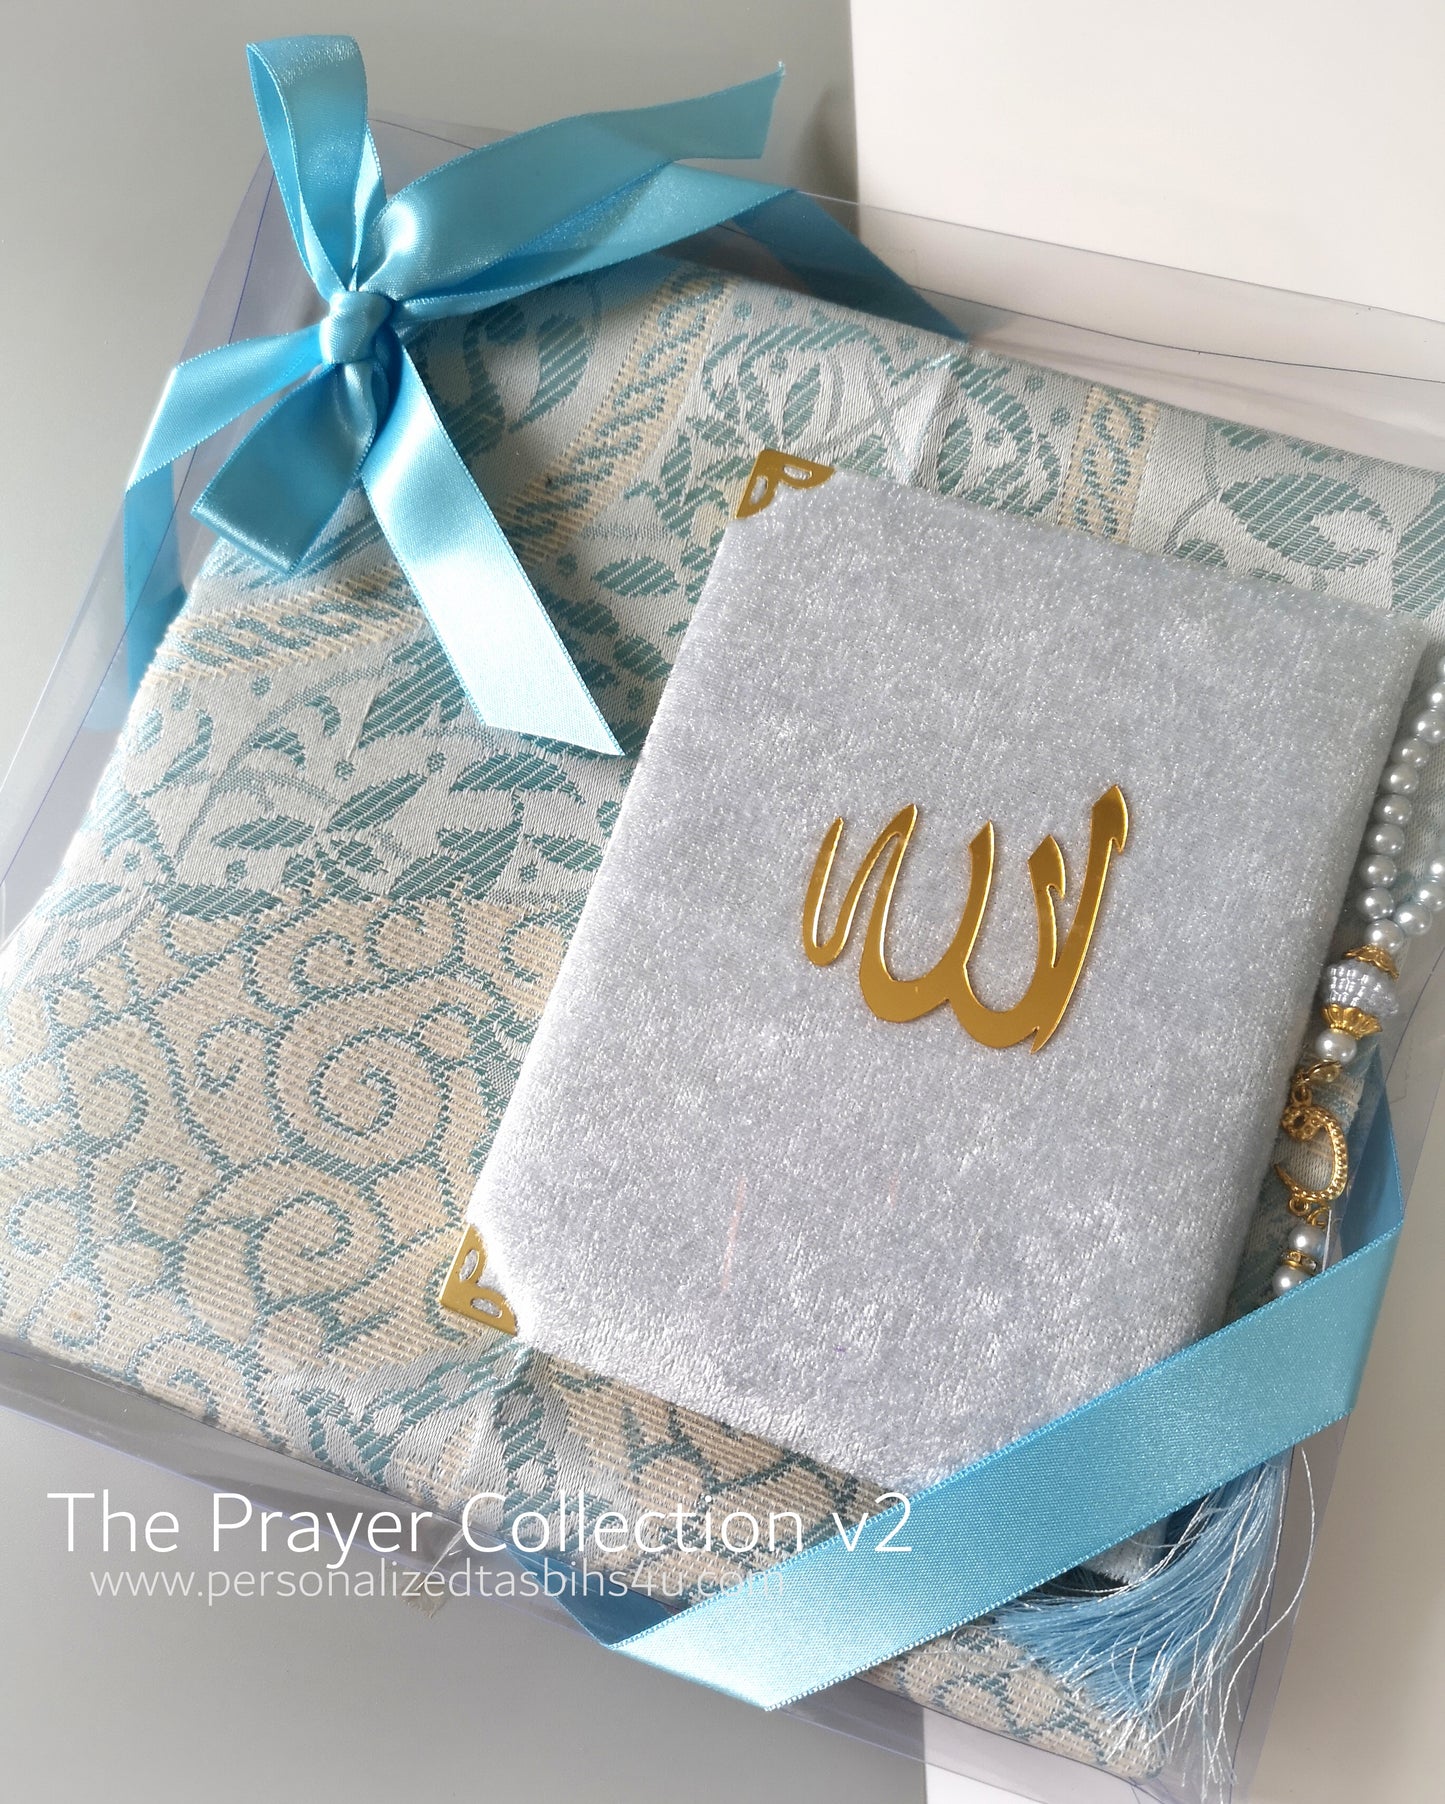 The Prayer Collection v2 - free personalisation option